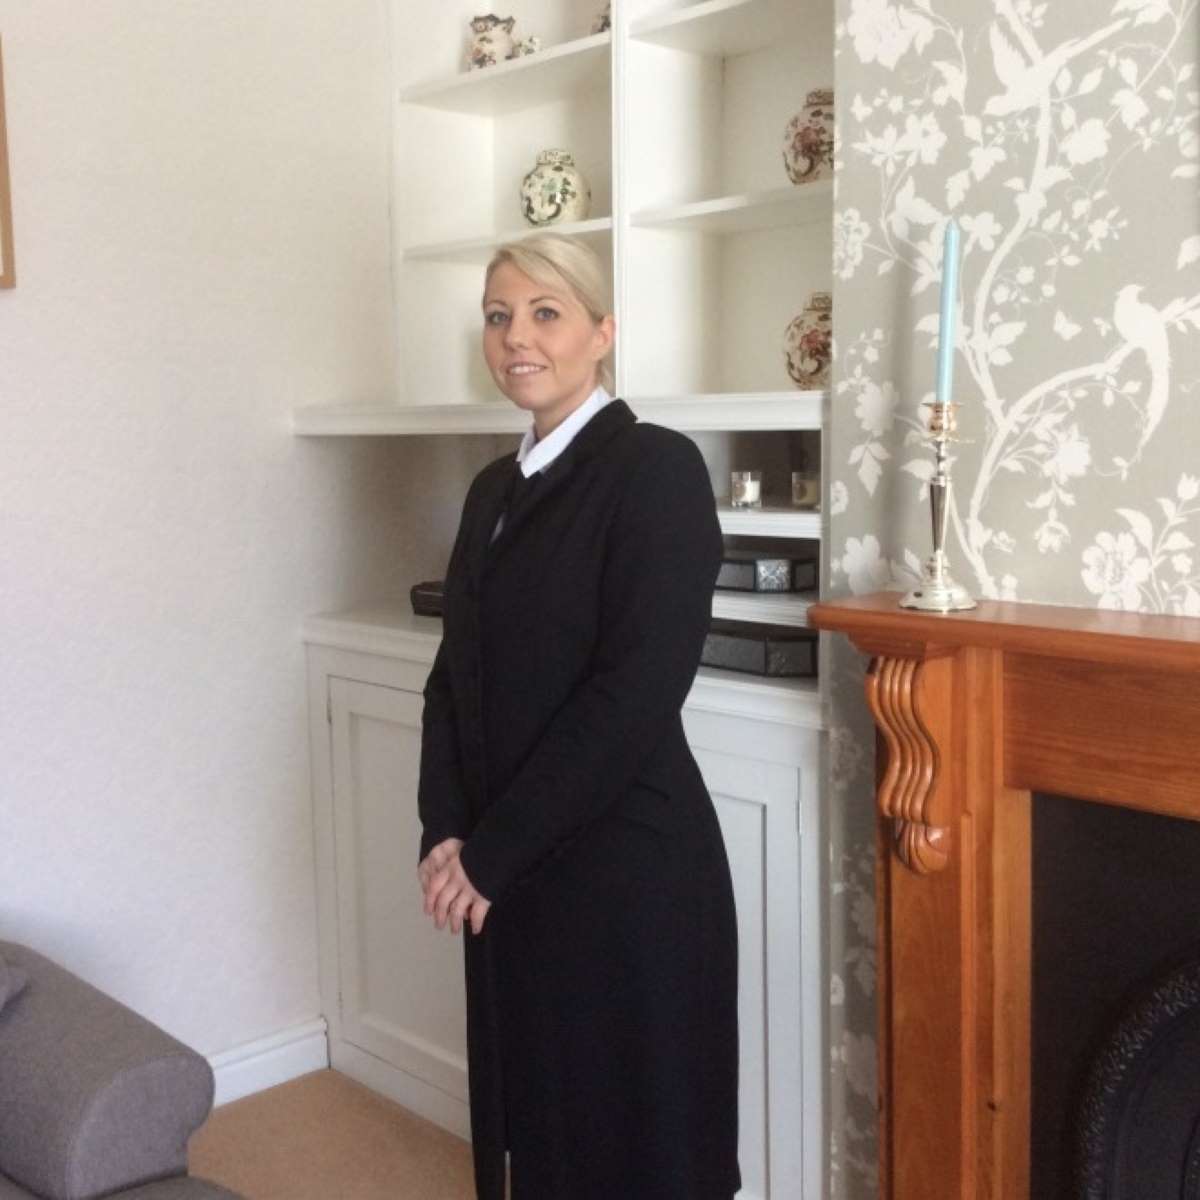 Nicholsons Funeral Directors in Longtown and Carlisle